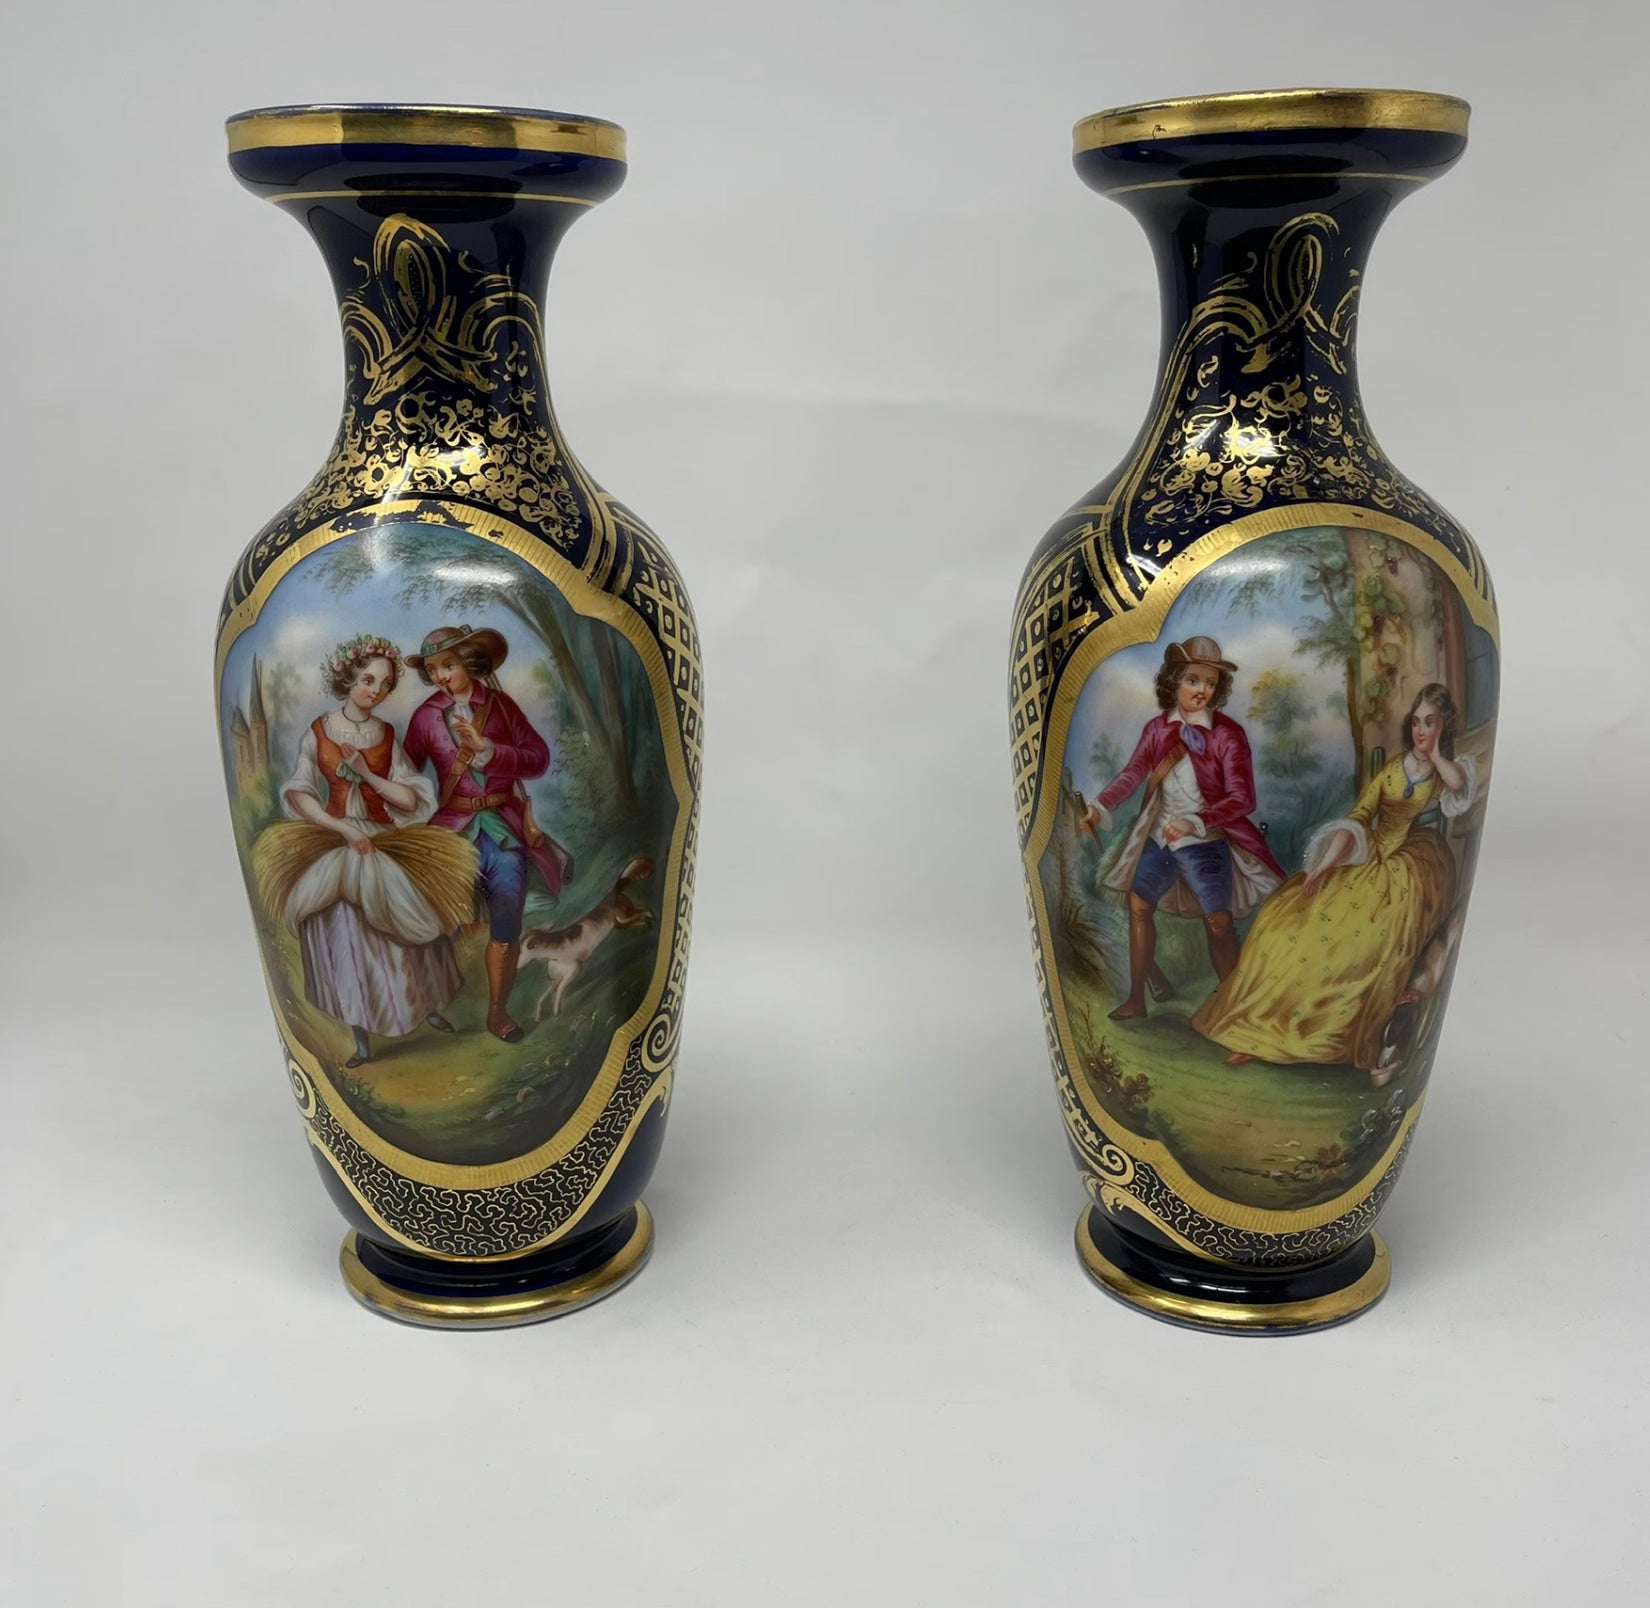 Antique French Old Paris Gilded Porcelain Vases with Hand Painted Courting Scenes - Pair